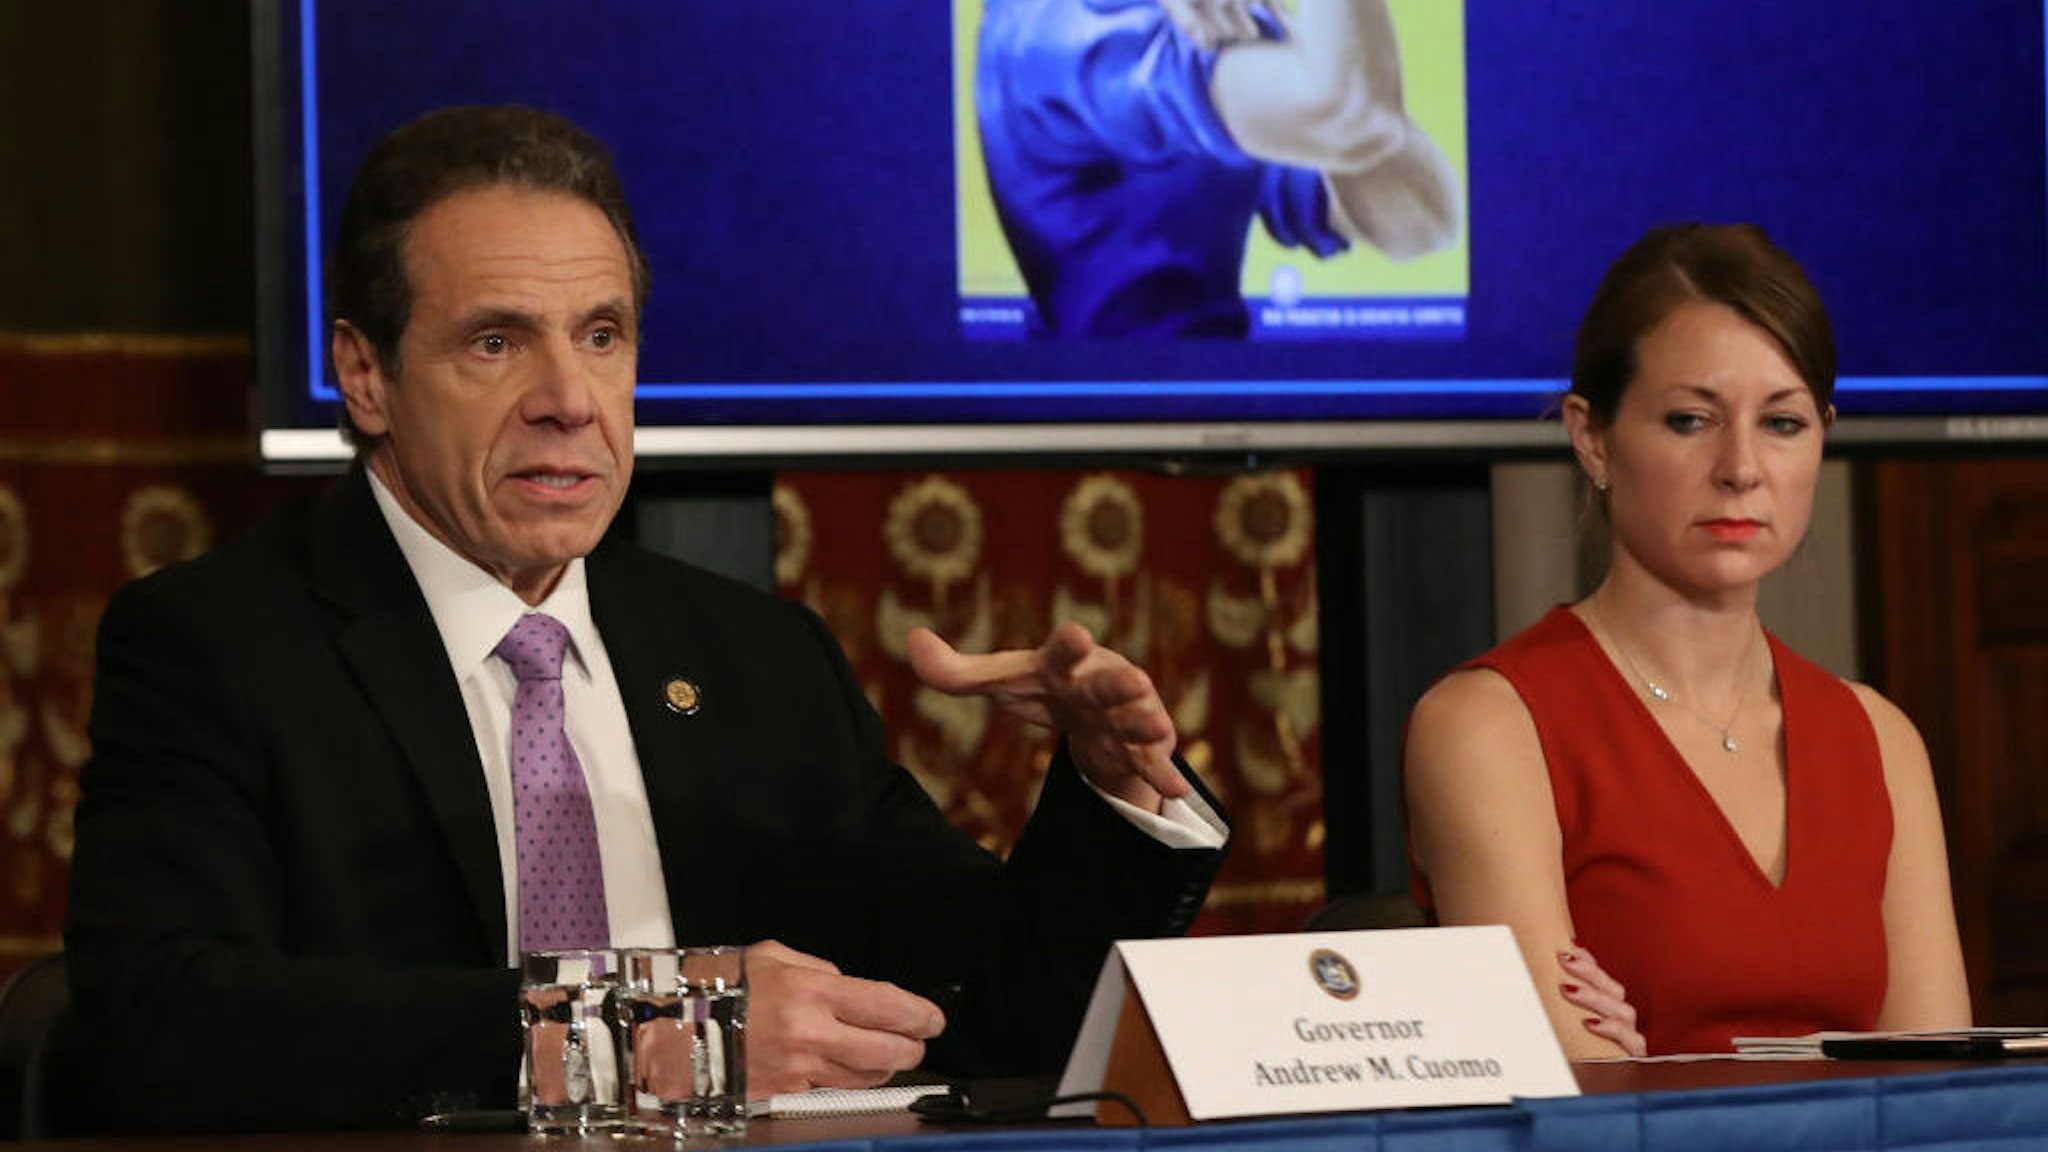 NEW YORK, NEW YORK - MARCH 20: New York Governor Andrew Cuomo (L) speaks during his daily news conference with Secretary to the Governor Melissa DeRosa (R) on March 20, 2020 in New York City. Cuomo ordered nonessential businesses to keep 100% of their workforce at home in an effort to combat the spread of the COVID-19 pandemic. (Photo by Bennett Raglin/Getty Images)